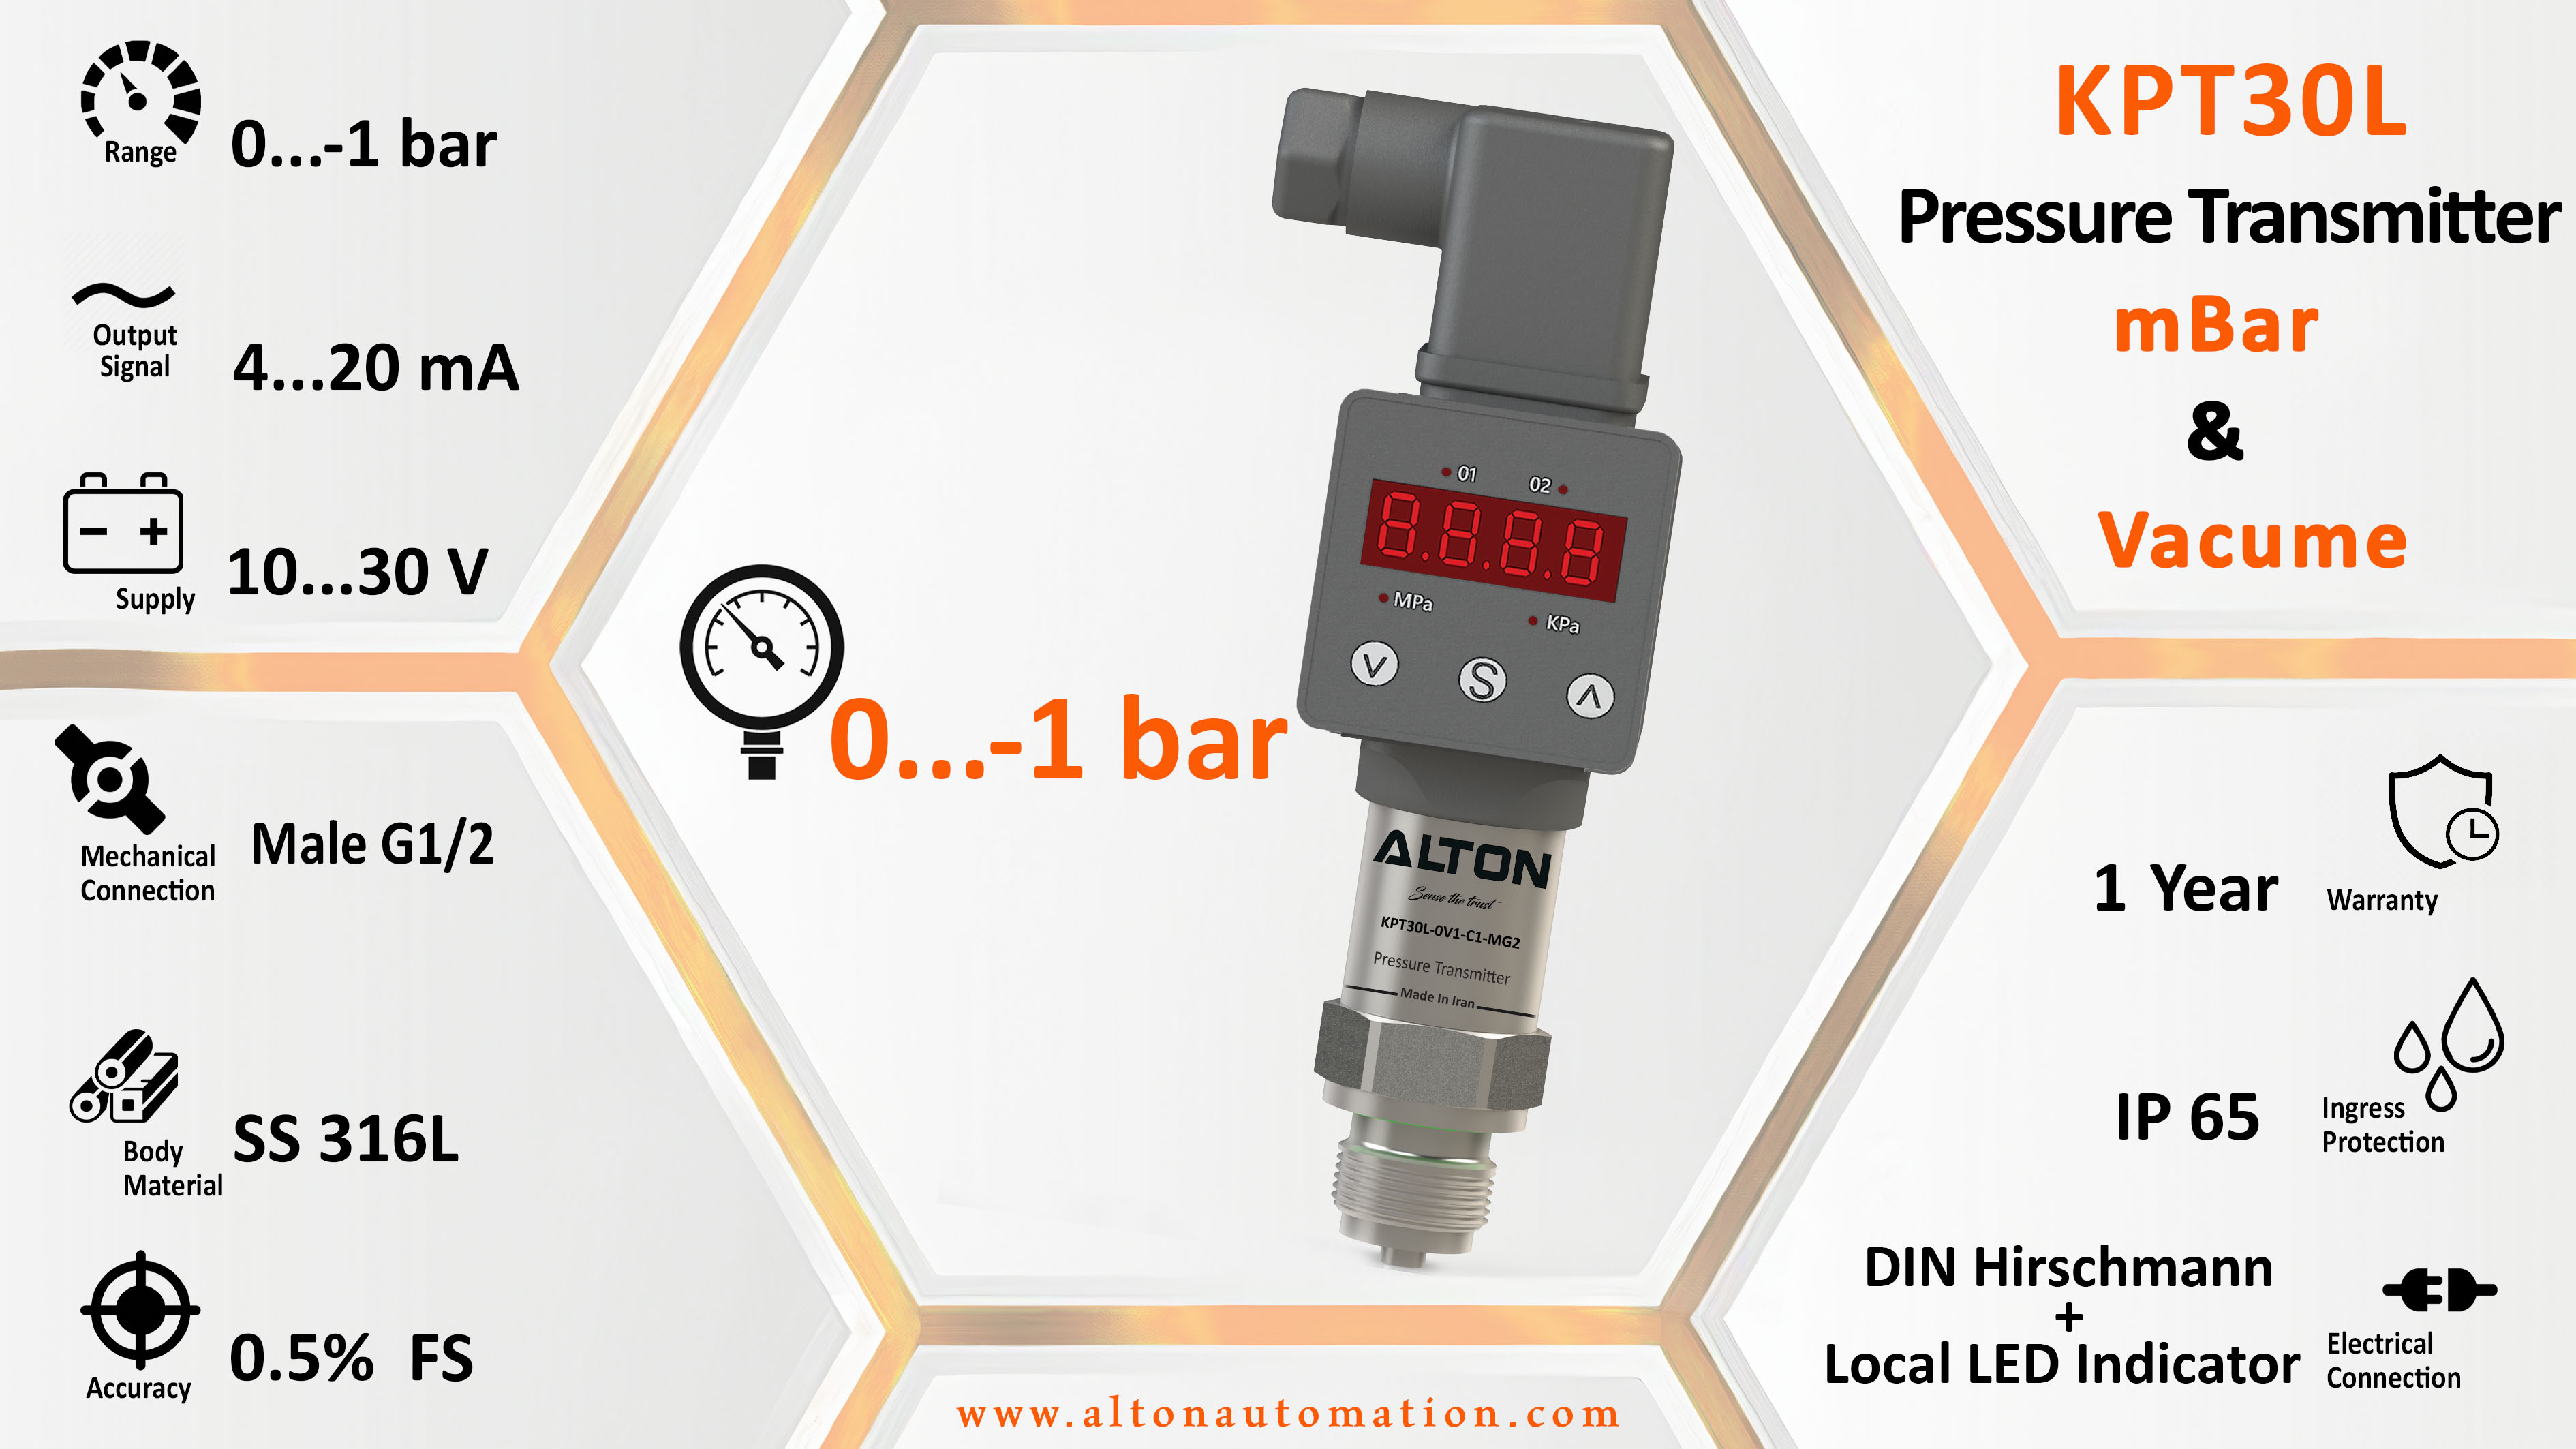 Pressure Transmitter for mbar and vacume-KPT30L-0V1-C1-MG2